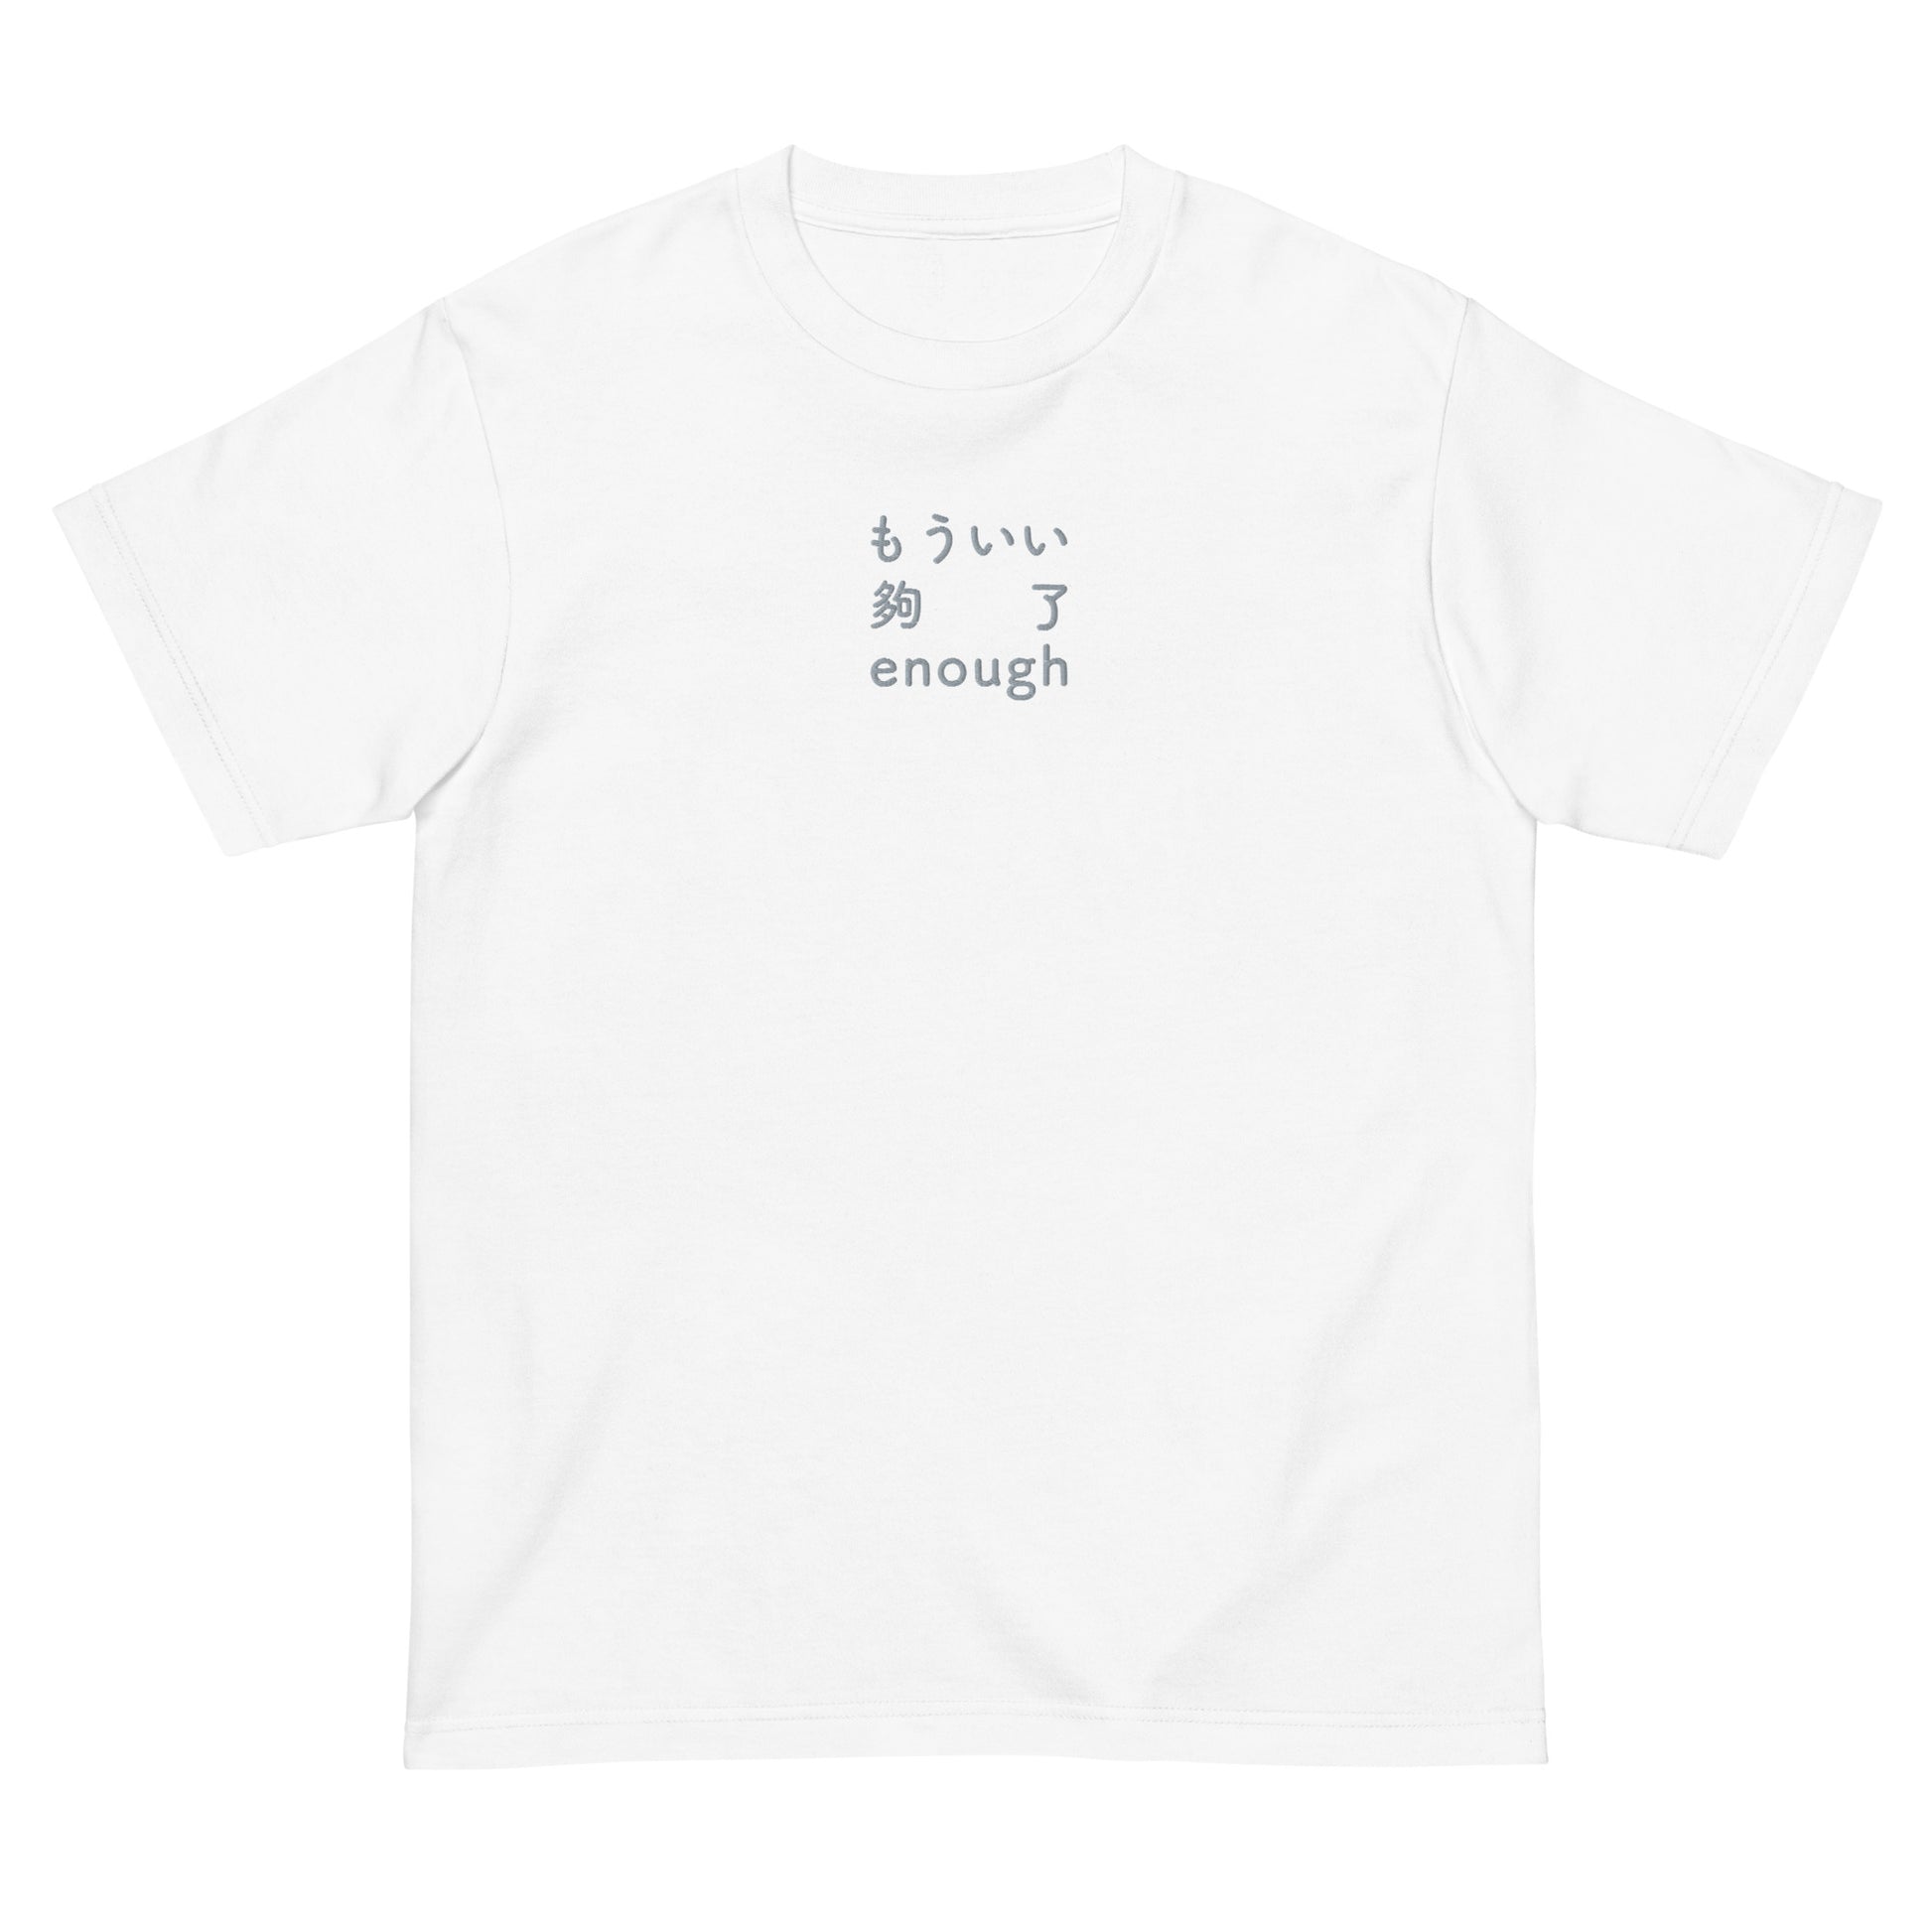 White High Quality Tee - Front Design with an light gray Embroidery "Enough" in Japanese,Chinese and English